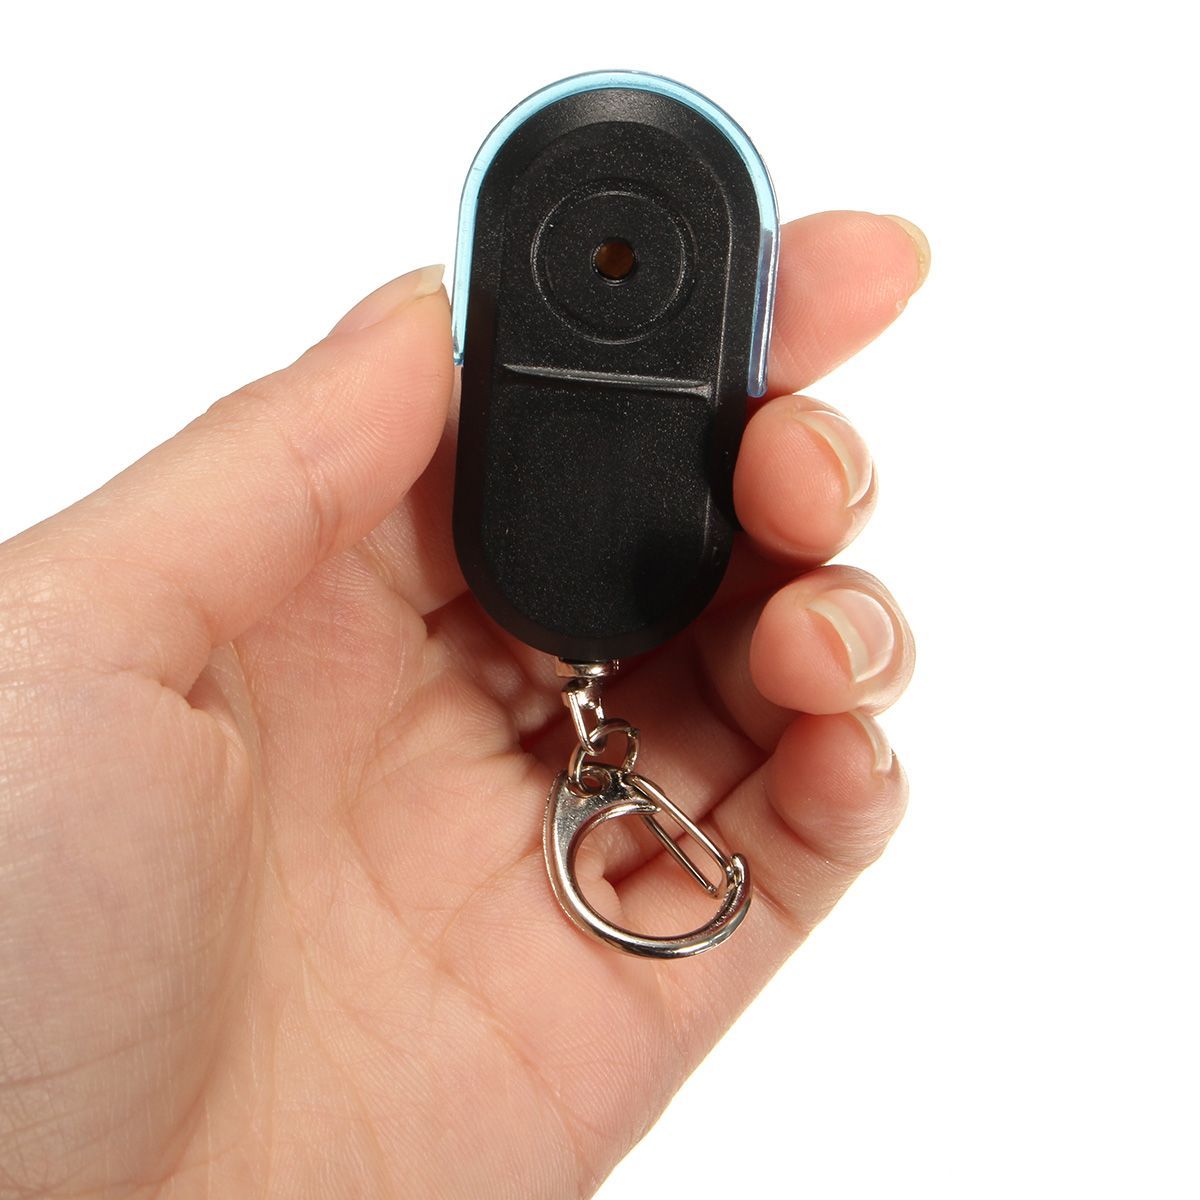 Wireless-Anti-Lost-Alarm-Key-Finder-Locator-Keychain-Whistle-Sound-with-LED-Light-1030593